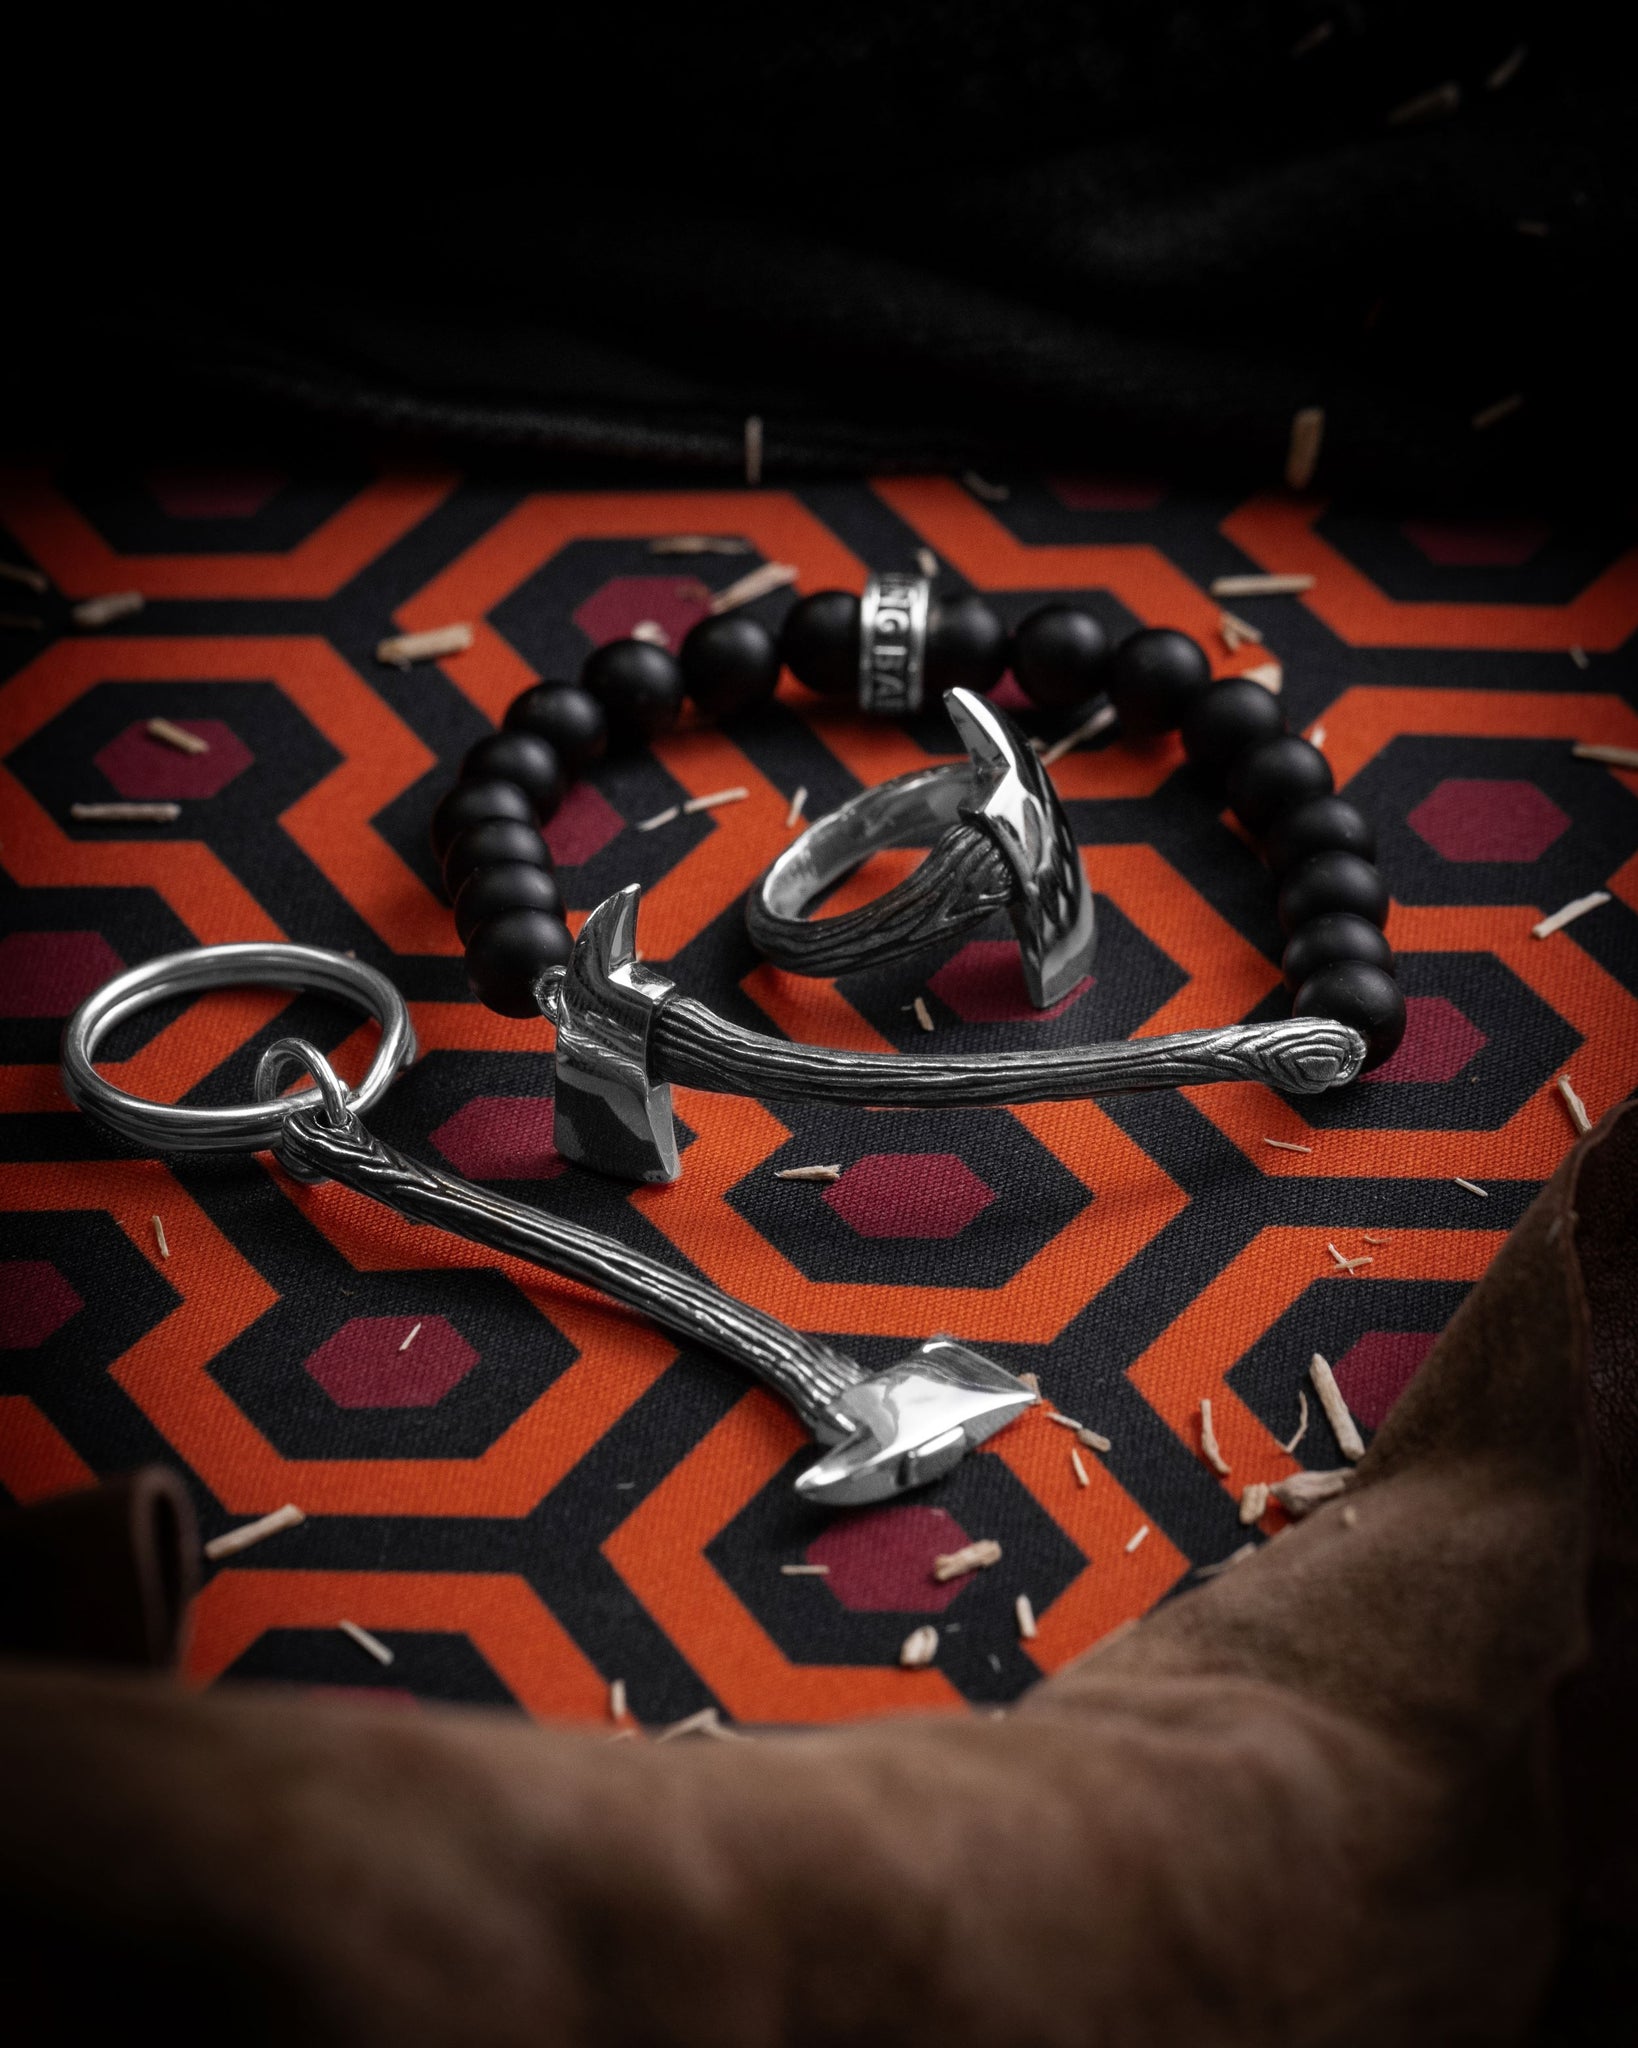 Style shot of axe key chain, axe bead bracelet, and wrapped axe ring